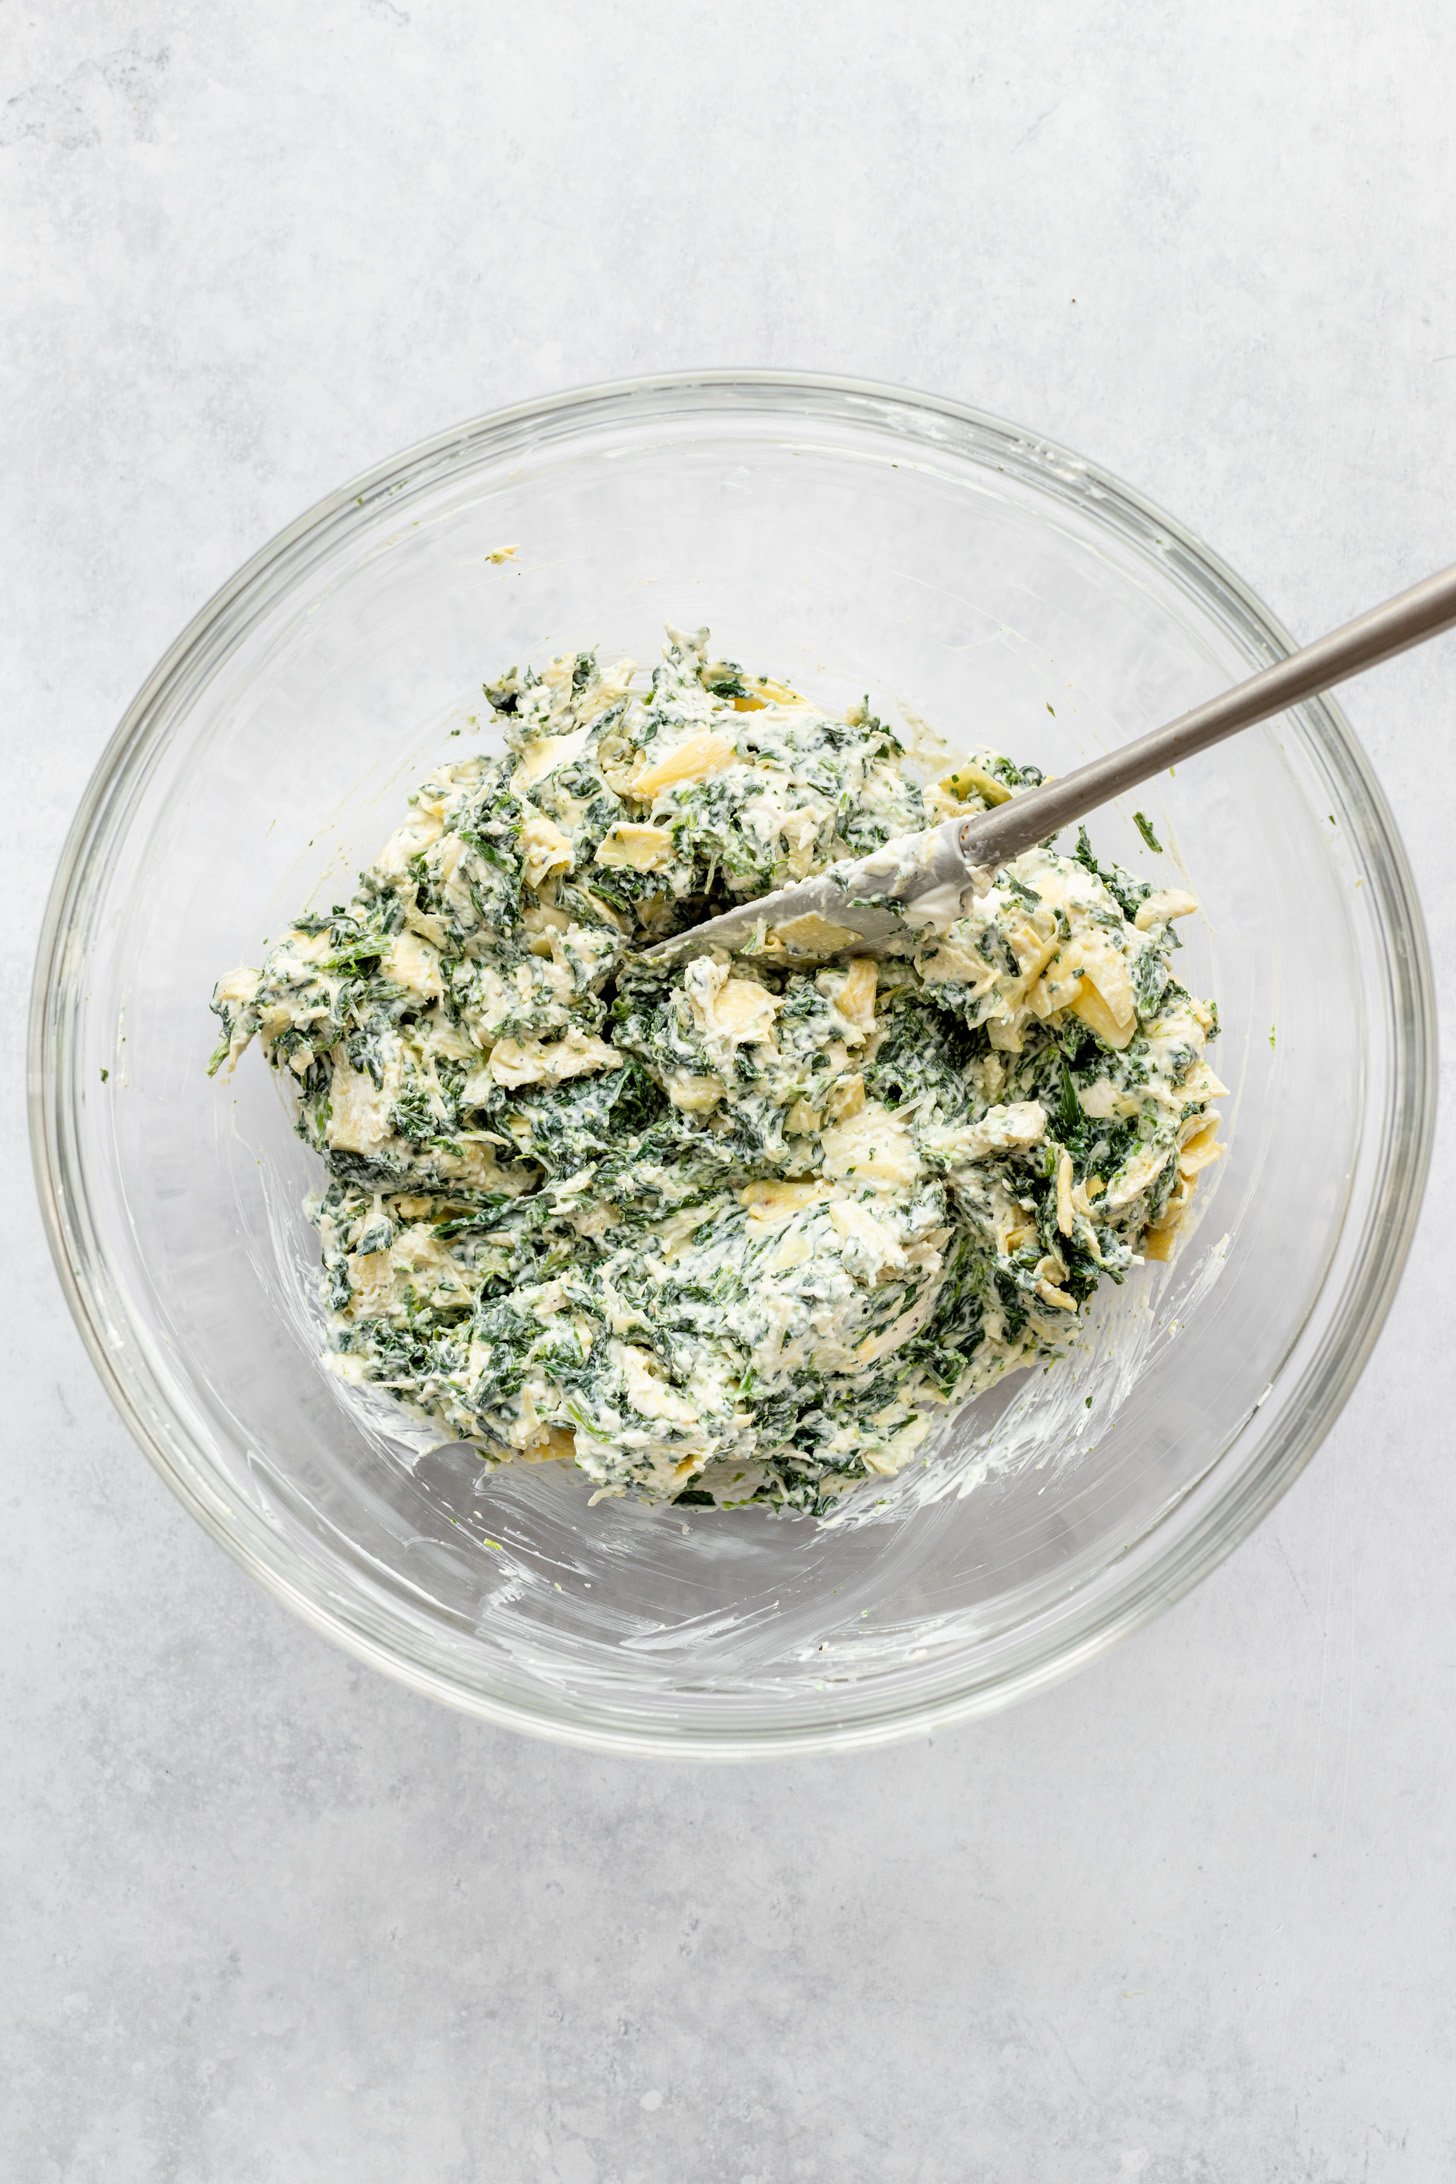 Chopped artichoke hearts, defrosted frozen spinach, Parmesan cheese, garlic, onion powder, salt, black ground pepper, cream cheese, and yogurt all mixed up with a spoon in a glass bowl. Glass bowl is sitting on countertop.